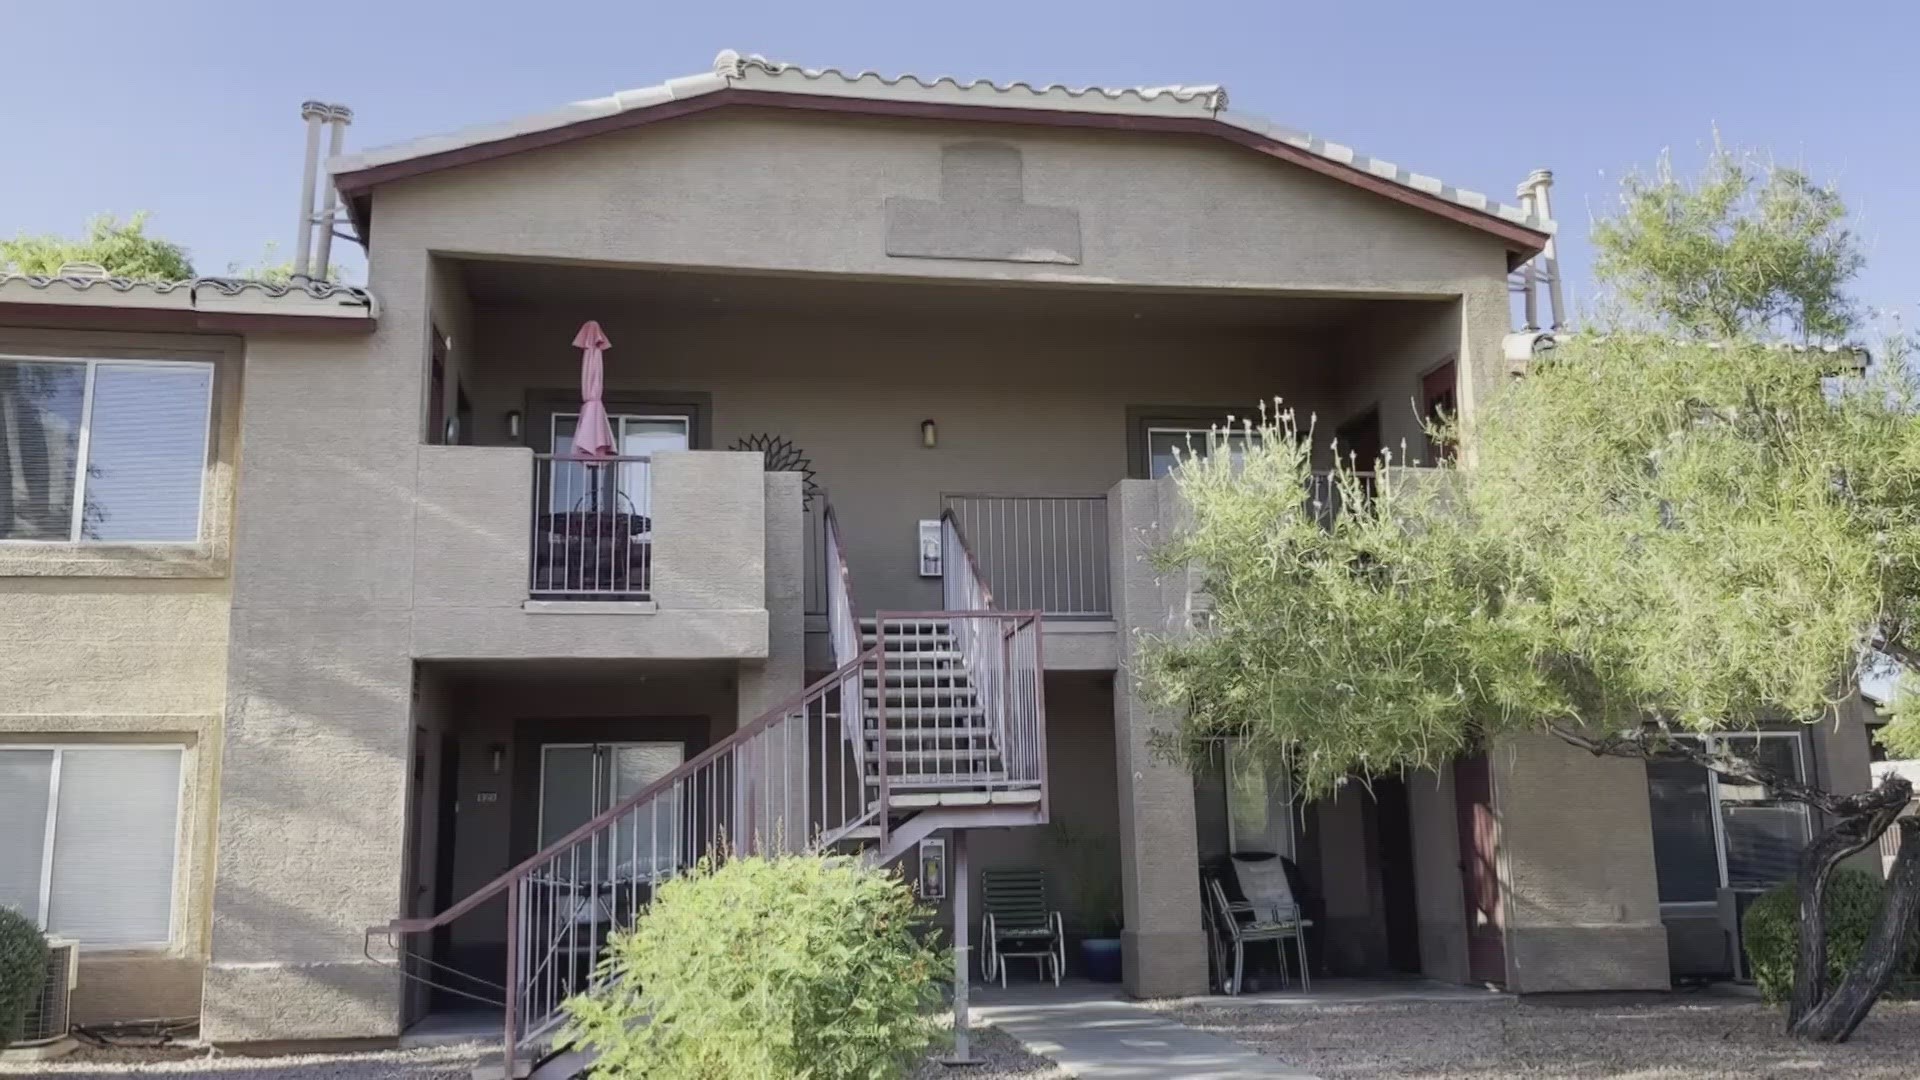 A loophole in a program meant to keep rents cheap for low-income Arizonans left these renters shocked to learn they may no longer be able to afford their homes.